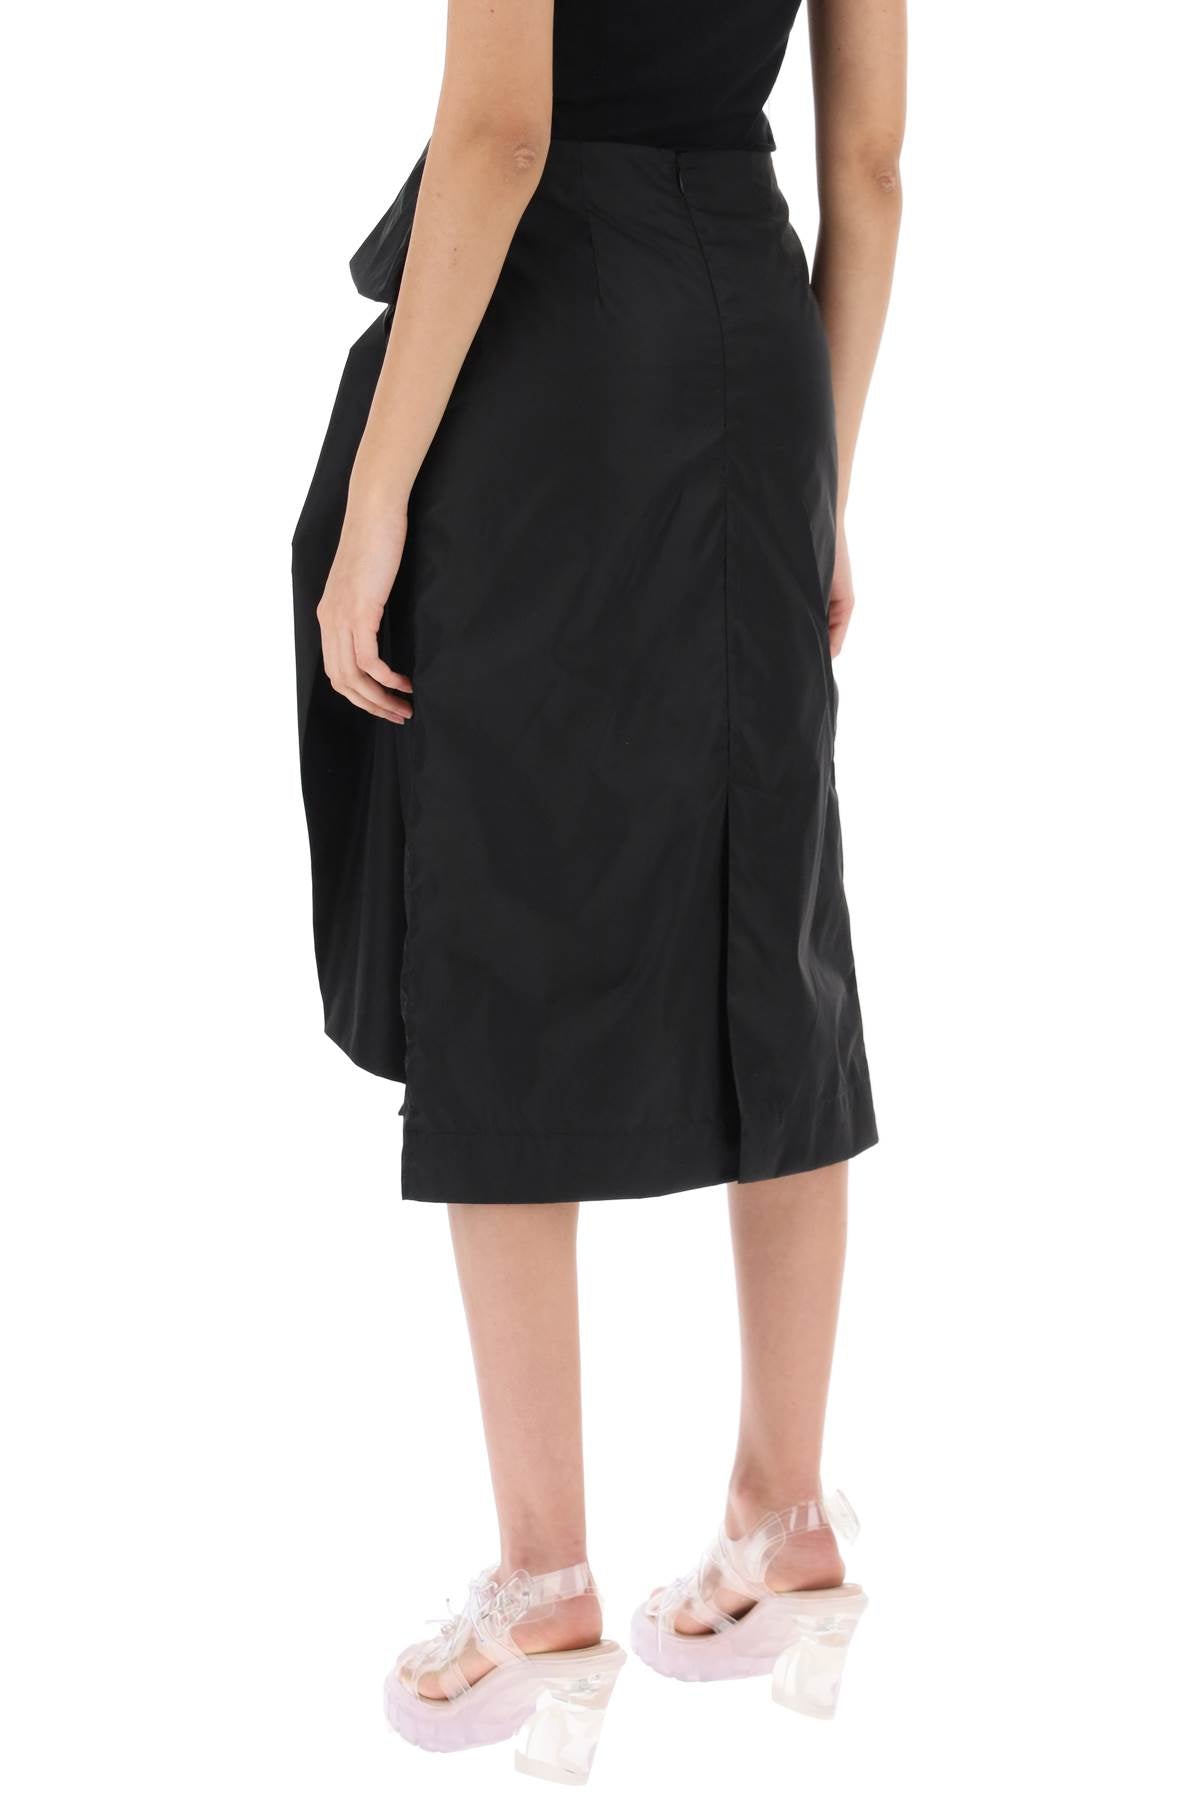 SIMONE ROCHA Pressed Rose Pencil Skirt in Black for Women - SS24 Collection